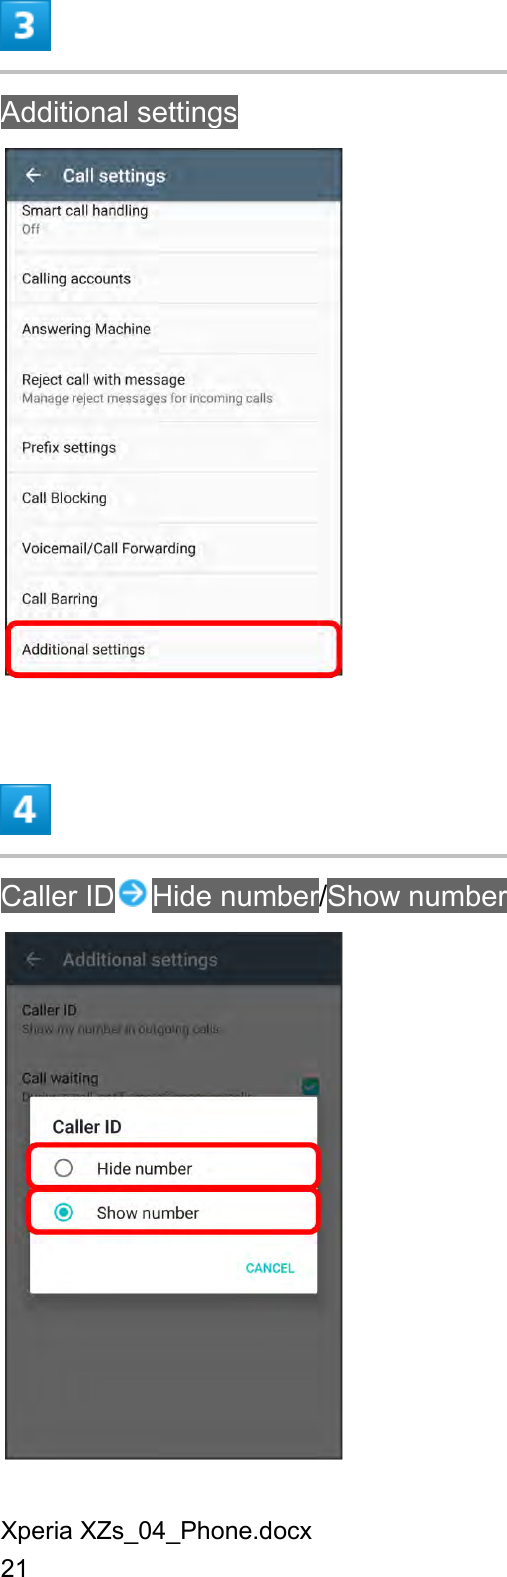 Xperia XZs_04_Phone.docx 21  Additional settings   Caller ID Hide number/Show number  